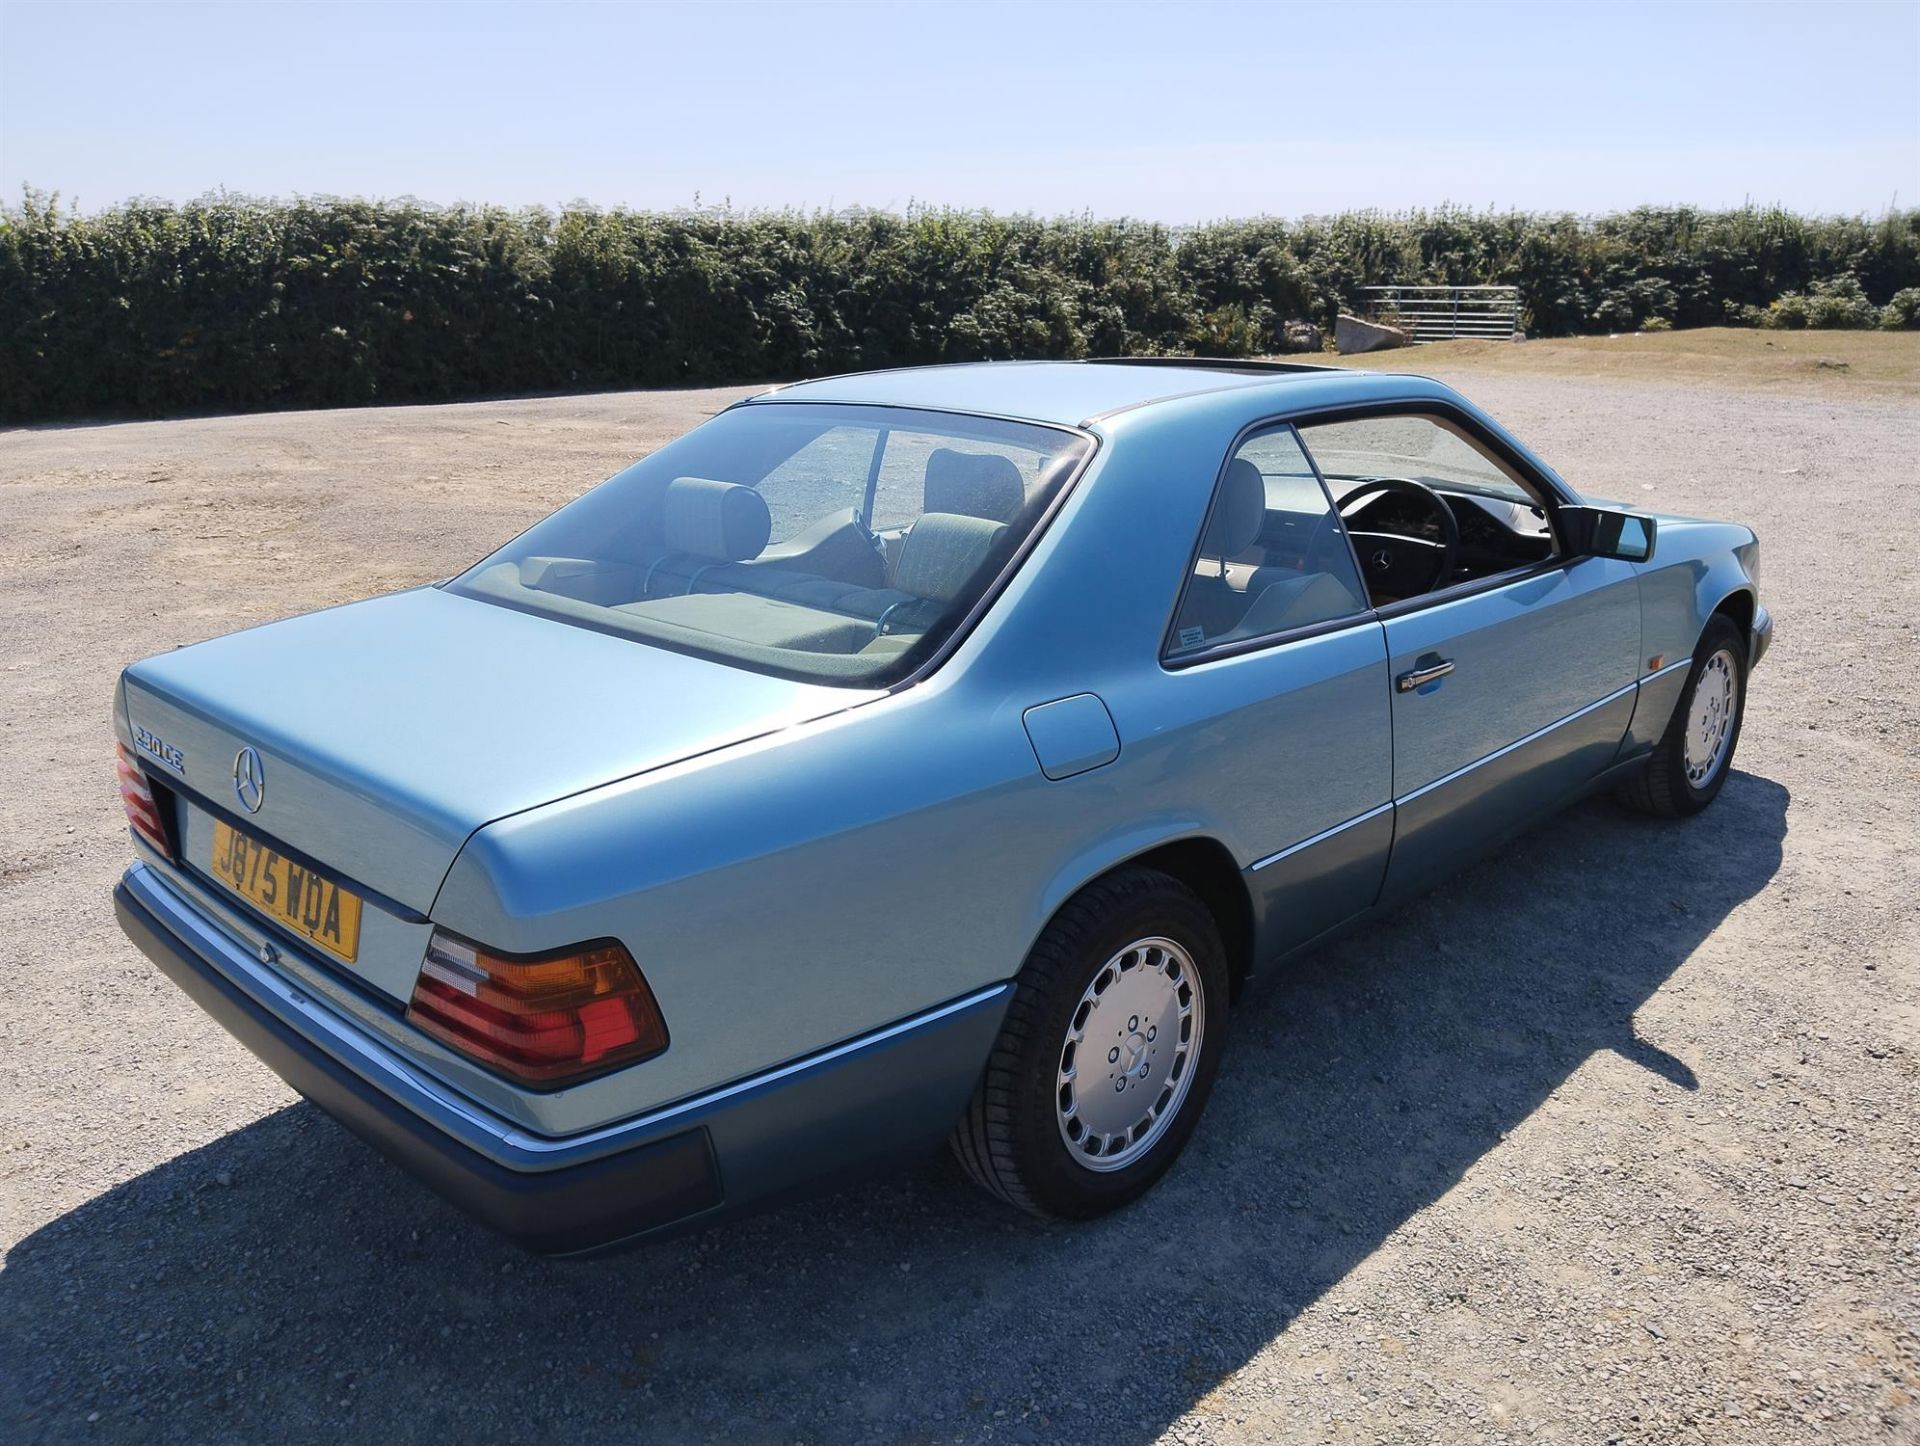 1990 Mercedes-Benz 230CE (W124) - Image 8 of 10